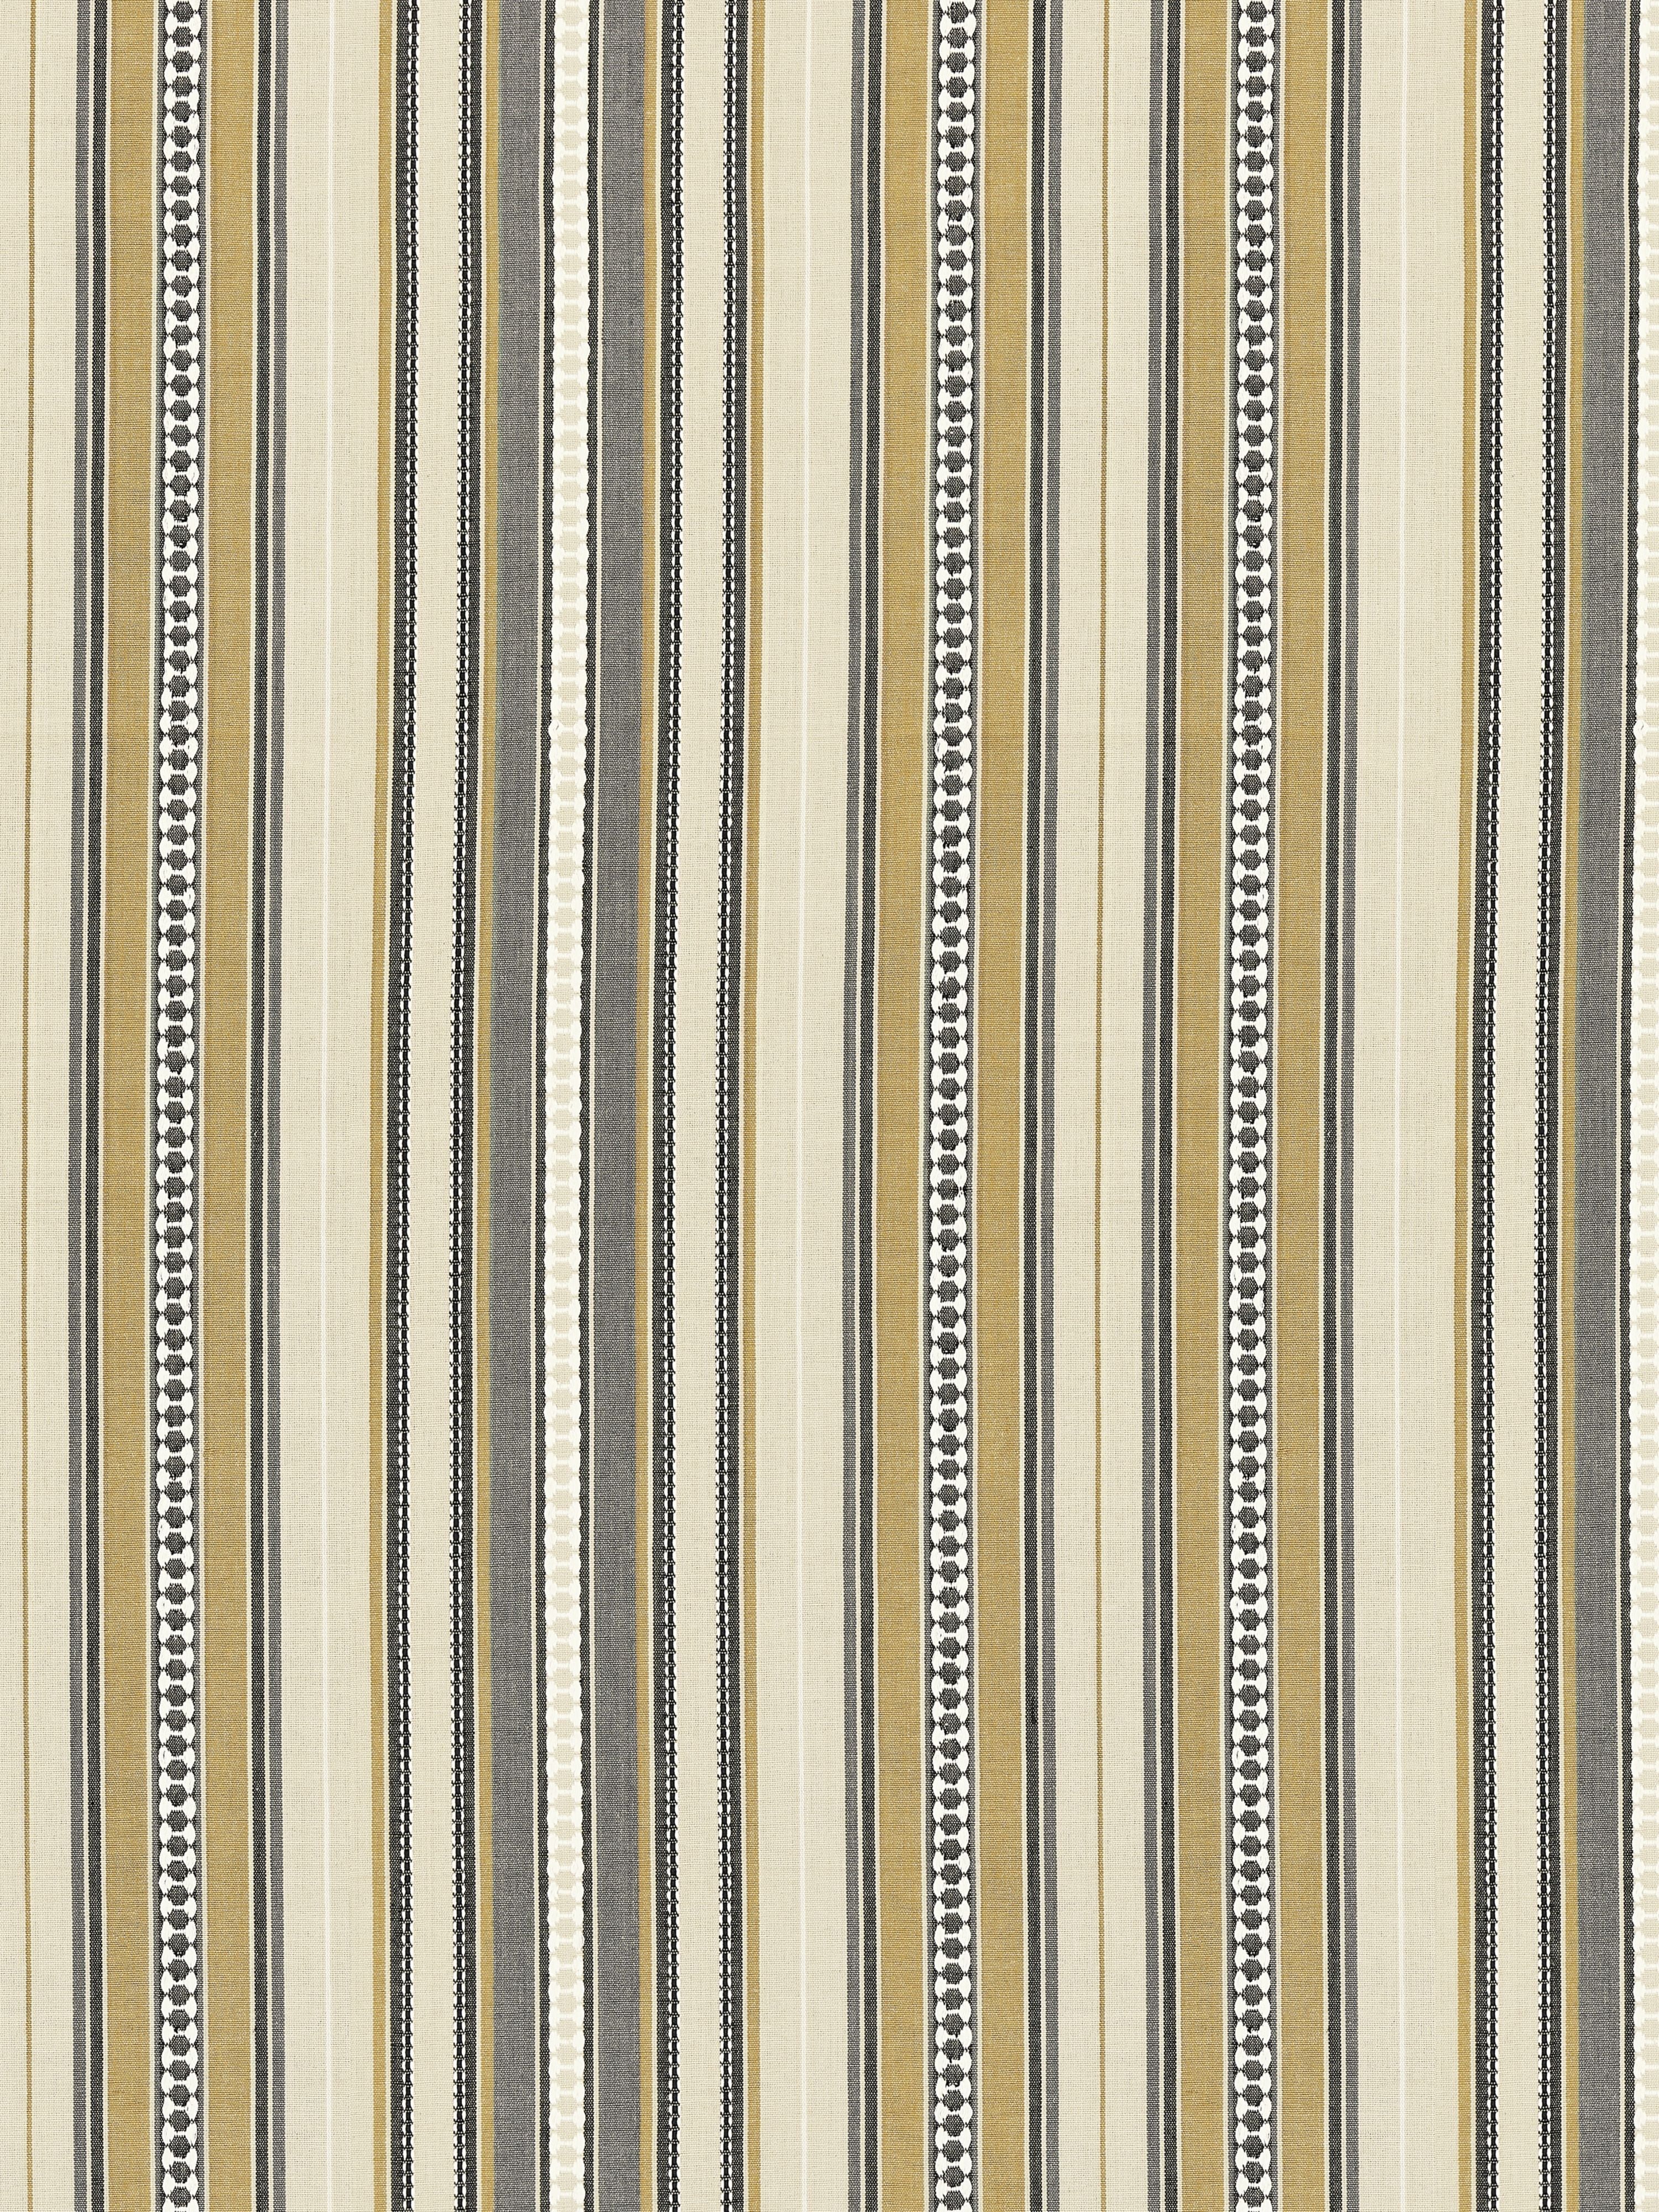 Nile Stripe fabric in desert color - pattern number SC 000127253 - by Scalamandre in the Scalamandre Fabrics Book 1 collection